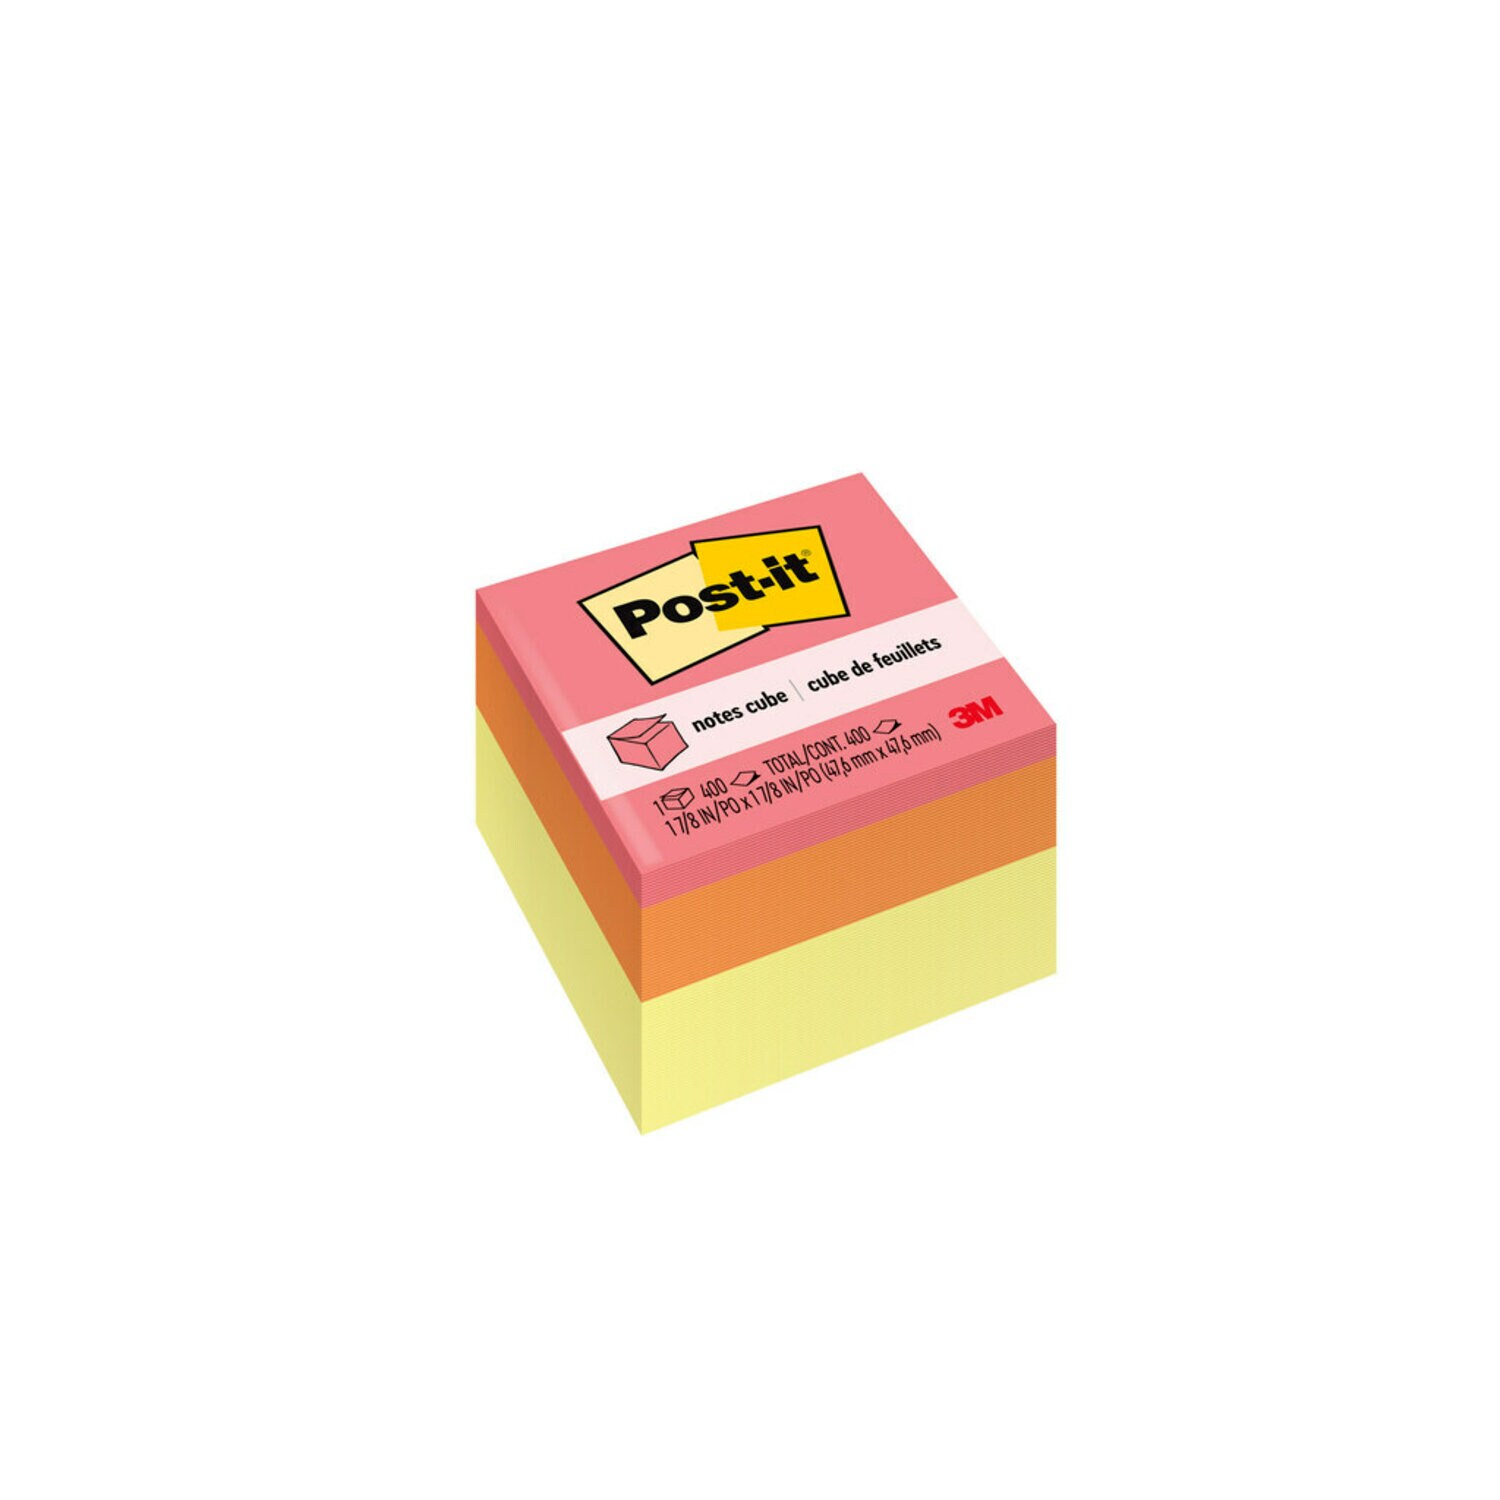 7010311488 - Post-it Notes Cube 2051-EBO-R 2 in x 2 in